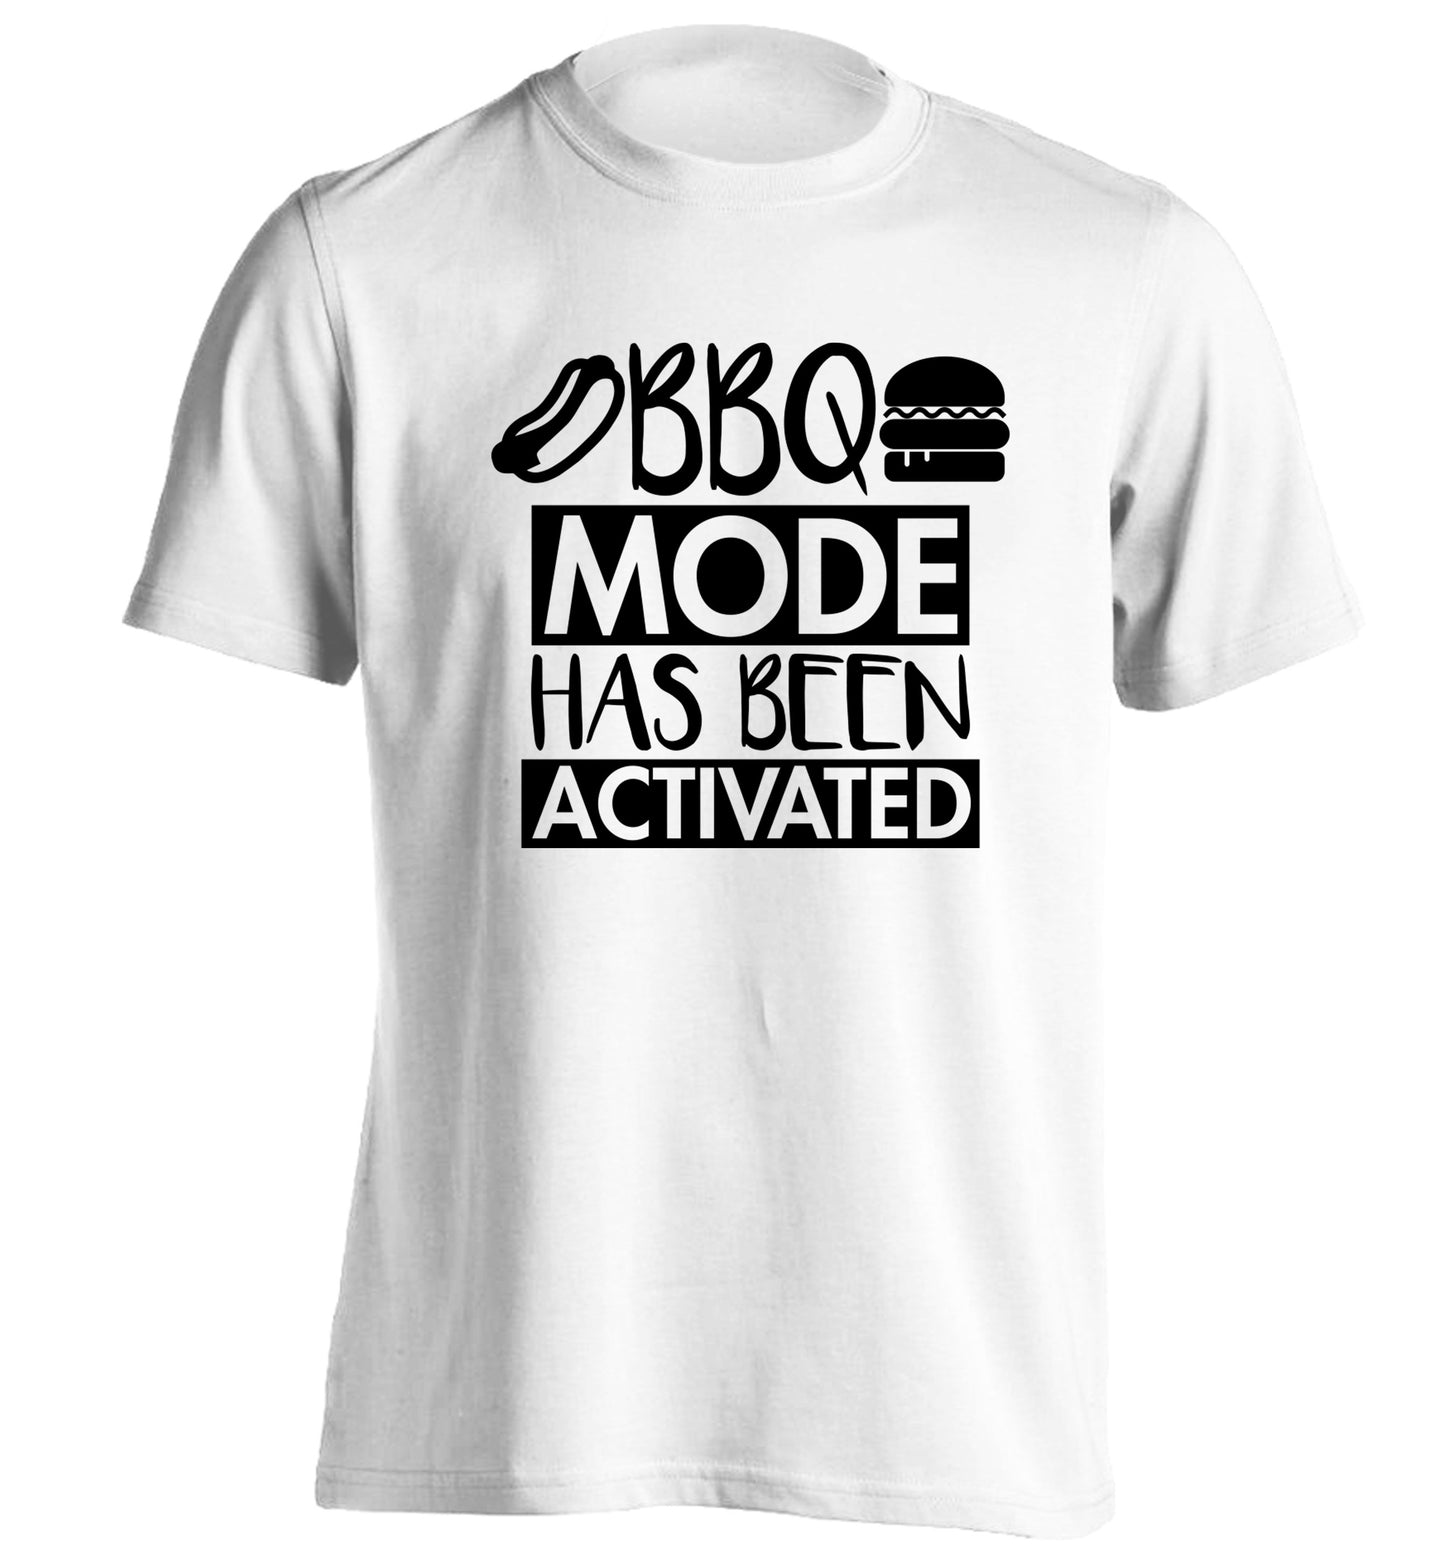 Bbq mode has been activated adults unisex white Tshirt 2XL